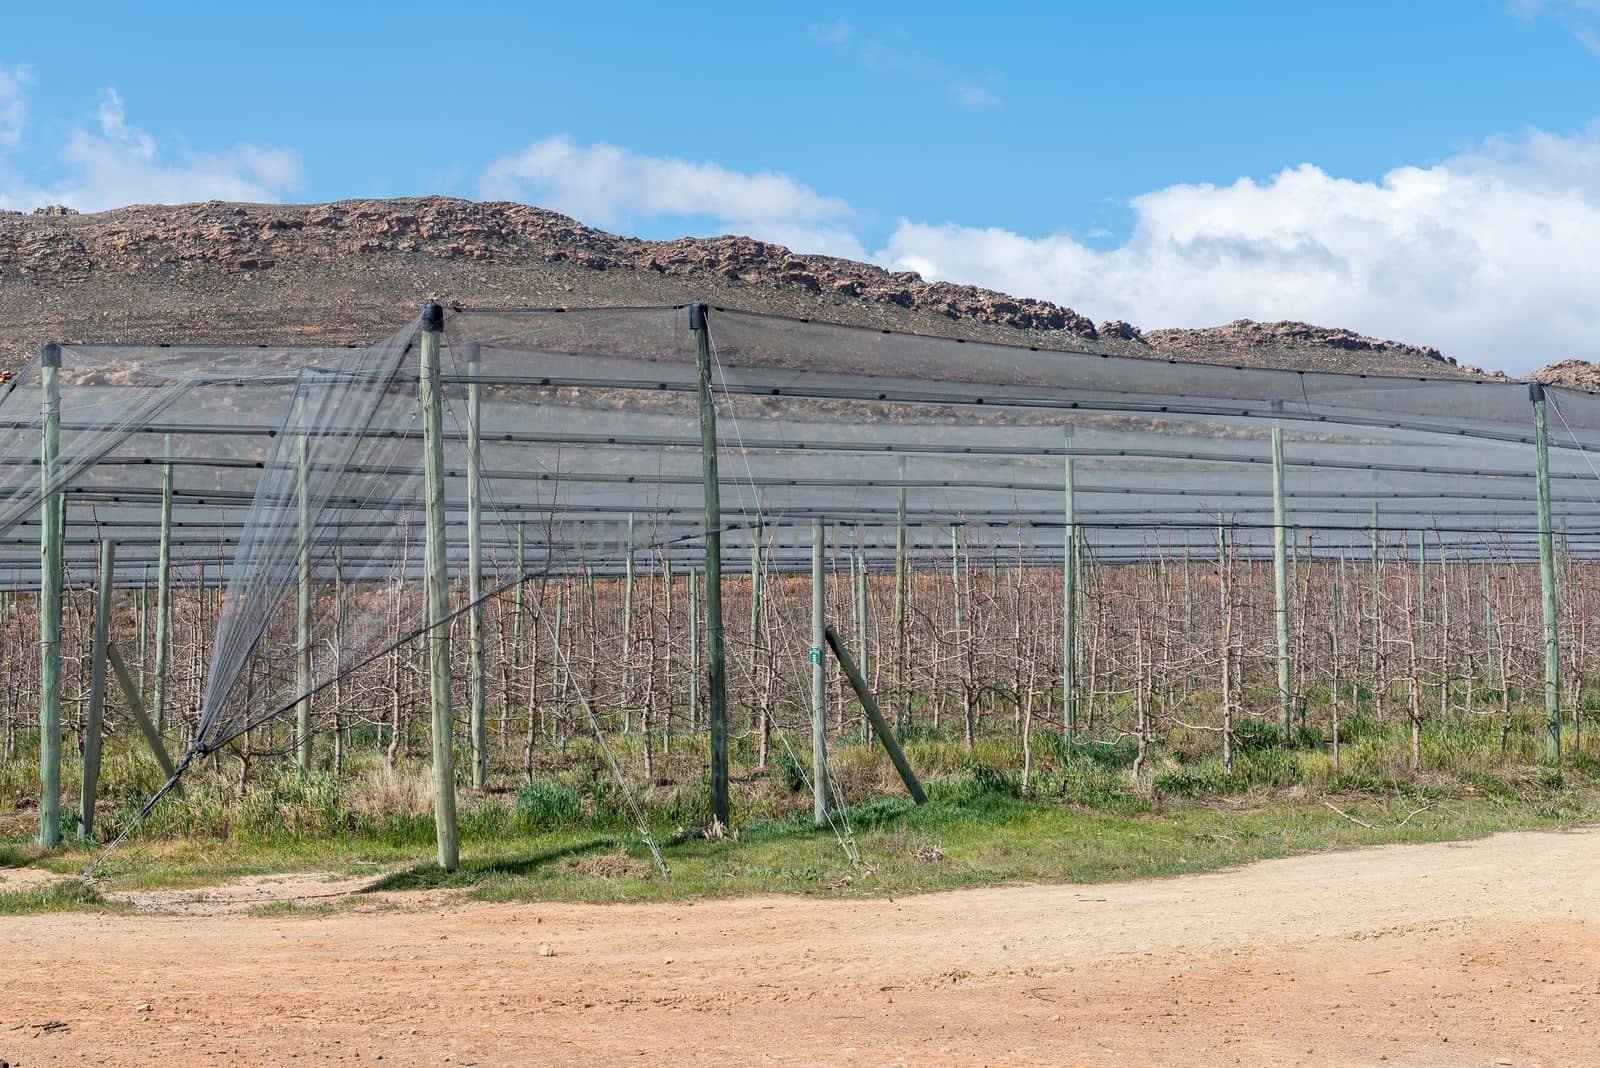 Fruit trees, using the espalier system, on the Katbakkies road by dpreezg